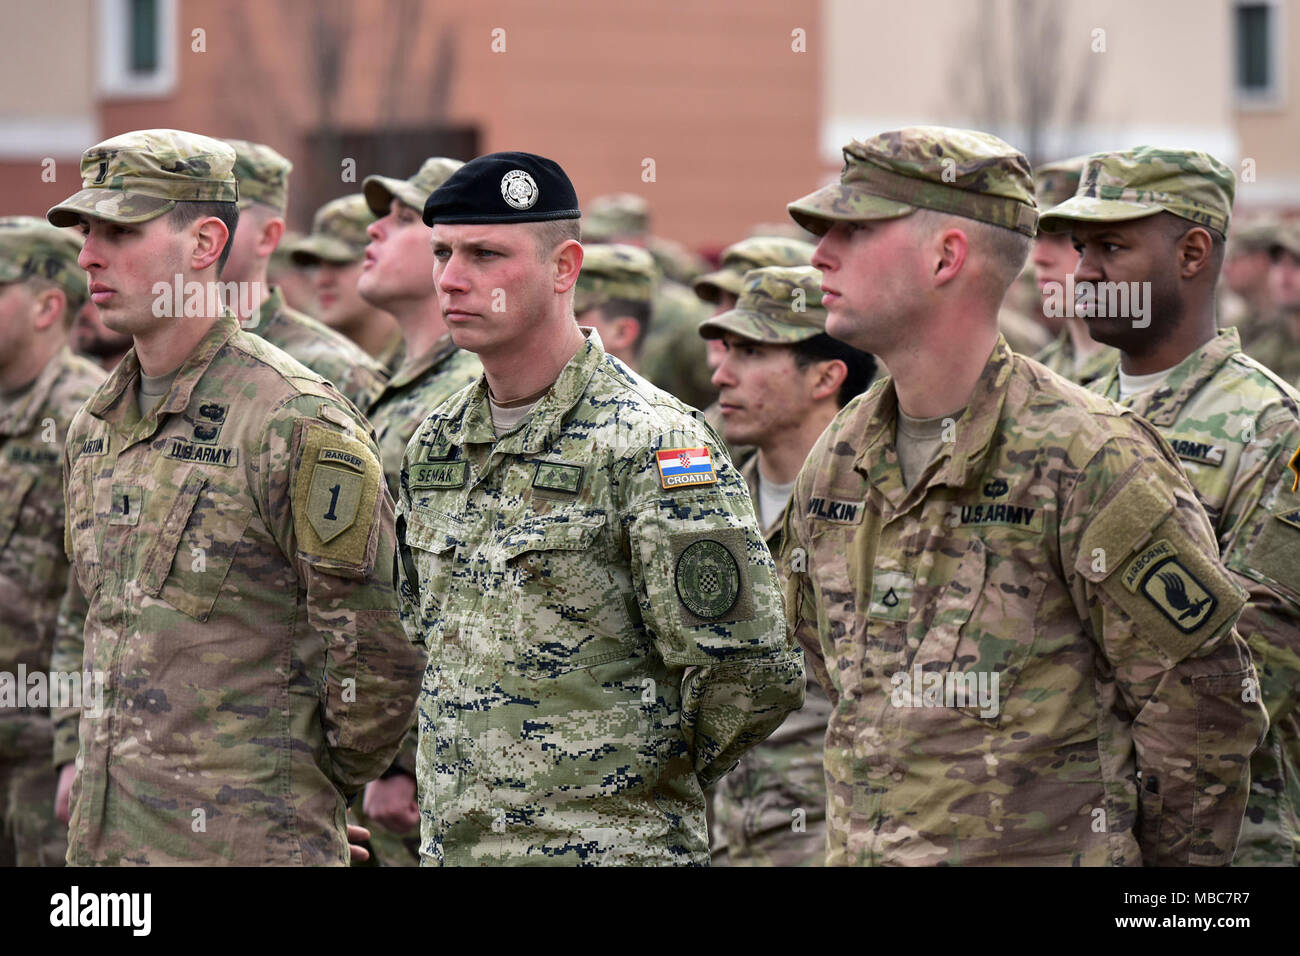 U.S. Army Soldiers and a Croatian Army Soldier stand in formation during the Expert Infantryman Badge (EIB) ceremony at Caserma Del Din, Vicenza, Italy, 15 Feb. 2018. (U.S. Army Stock Photo